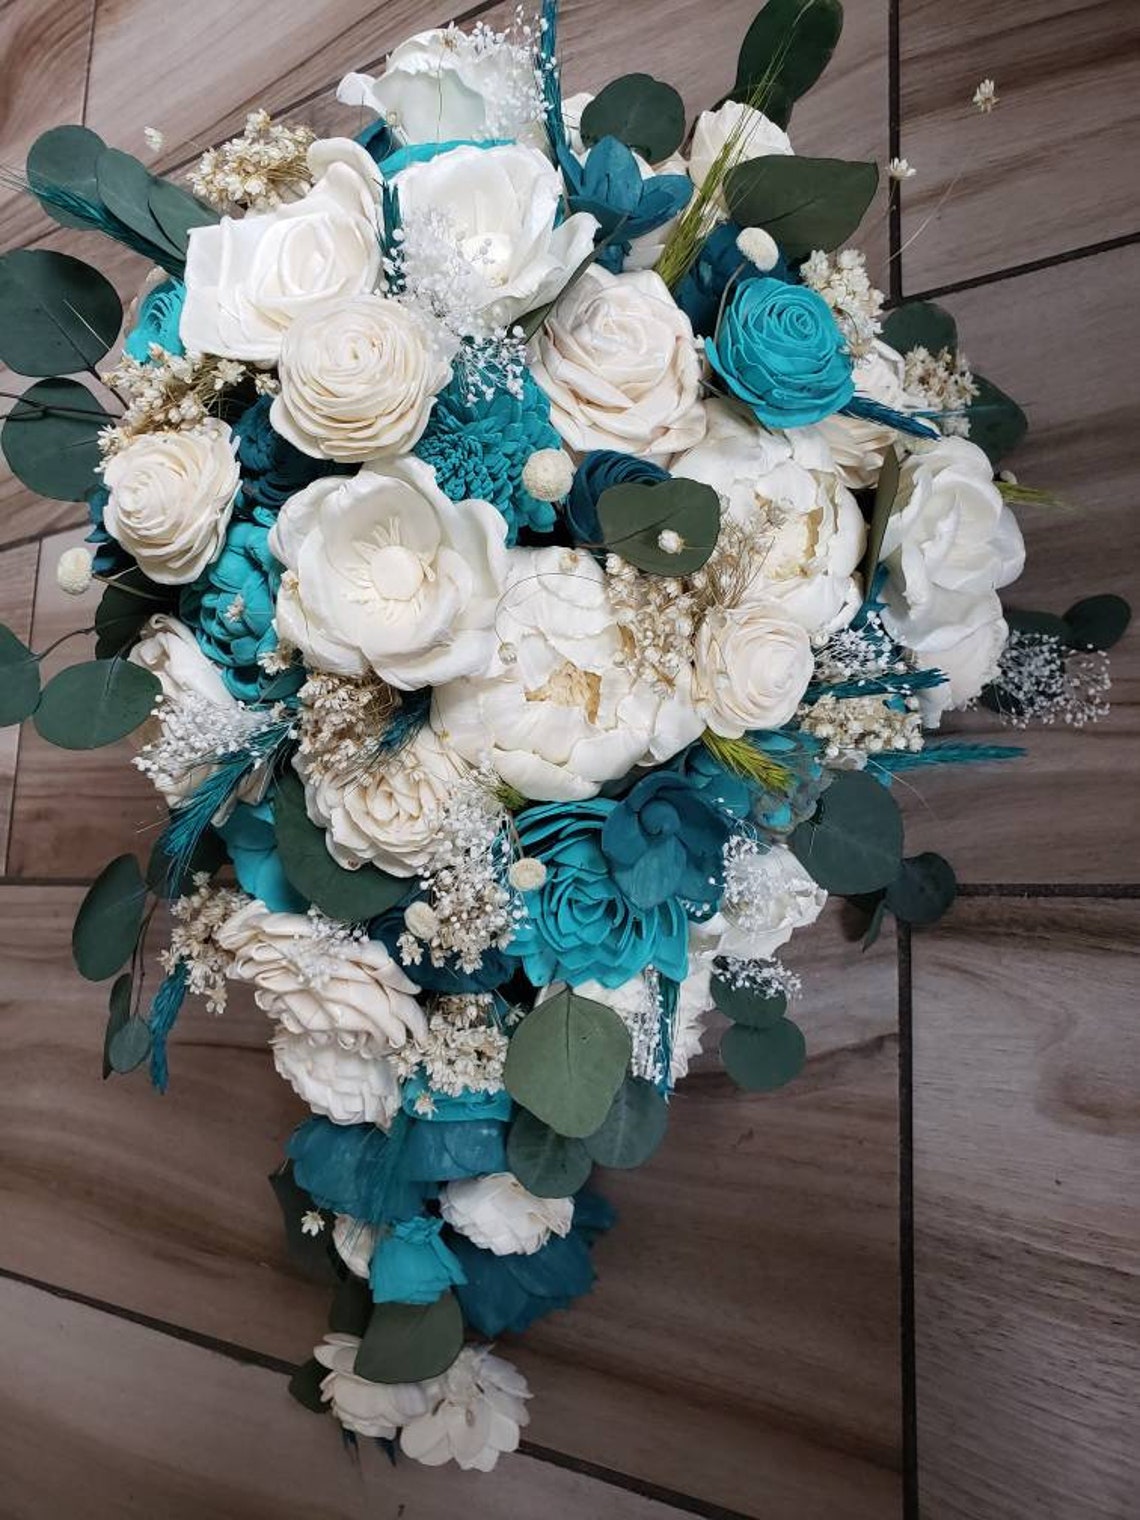 Teal and turquoise cascading bouquet sola wood flowers | Etsy